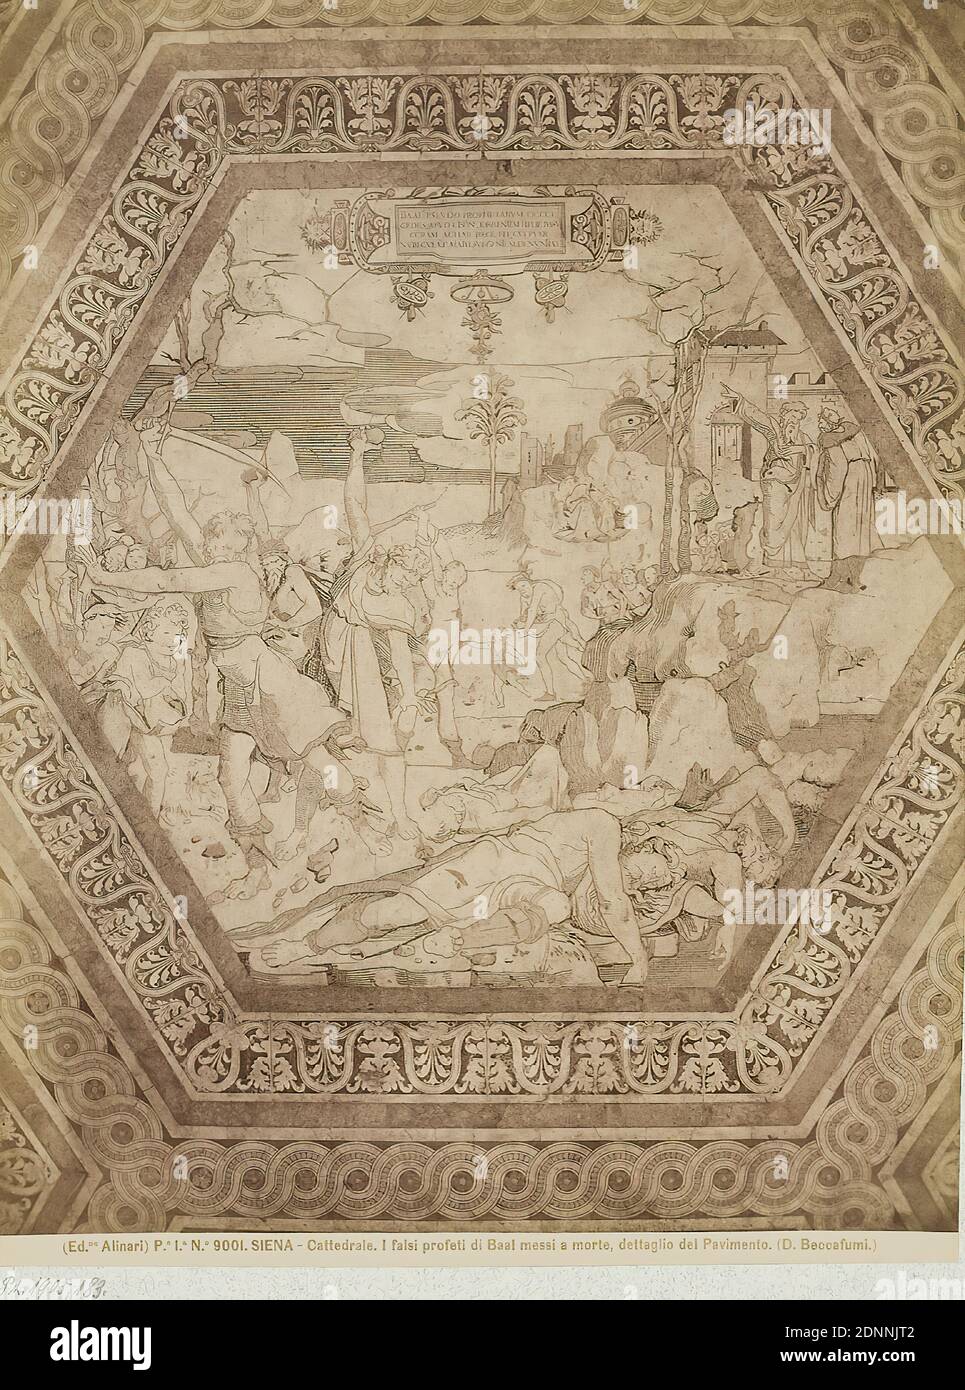 Domenico Beccafumi: The false prophets of Baal, detail of the floor in the Cathedral of Siena, albumin paper, black and white positive process, image size: height: 25,50 cm; width: 19,20 cm, SIENA - Cattedrale. I falsi profeti di Baal messi a morte, dettaglio del Pavimento. (D. Beccafumi.). Verso Stamp: MUSEUM F. ART & CRAFT Hamburg, Elias challenges the priests of Baal, end of dryness, floor (architecture), art Stock Photo